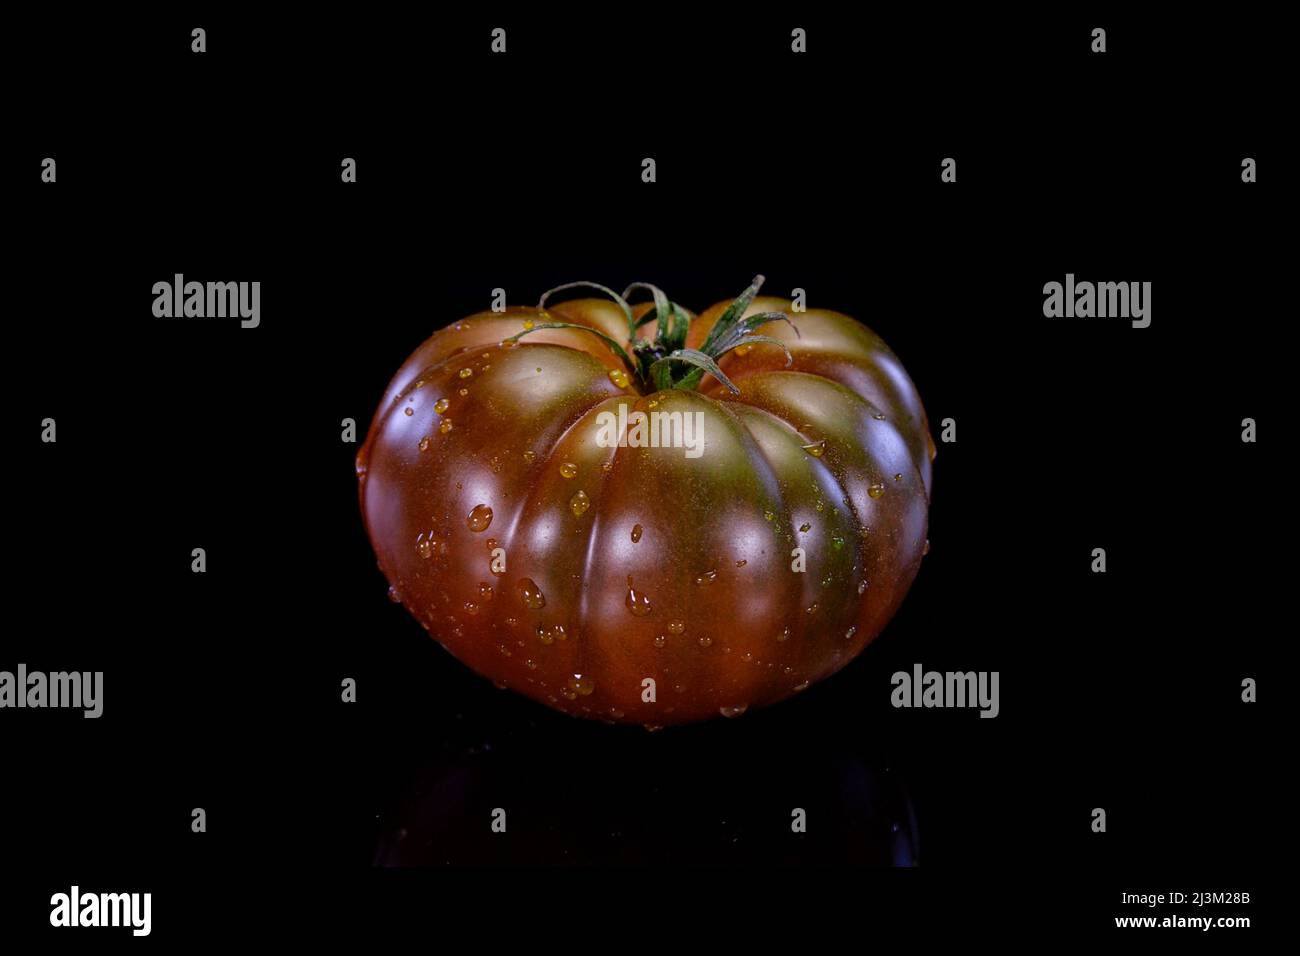 Chocolate tomatoes on a black background. Fresh and firm tomato. Restaurant, groceries store or agriculture promo. Stock Photo